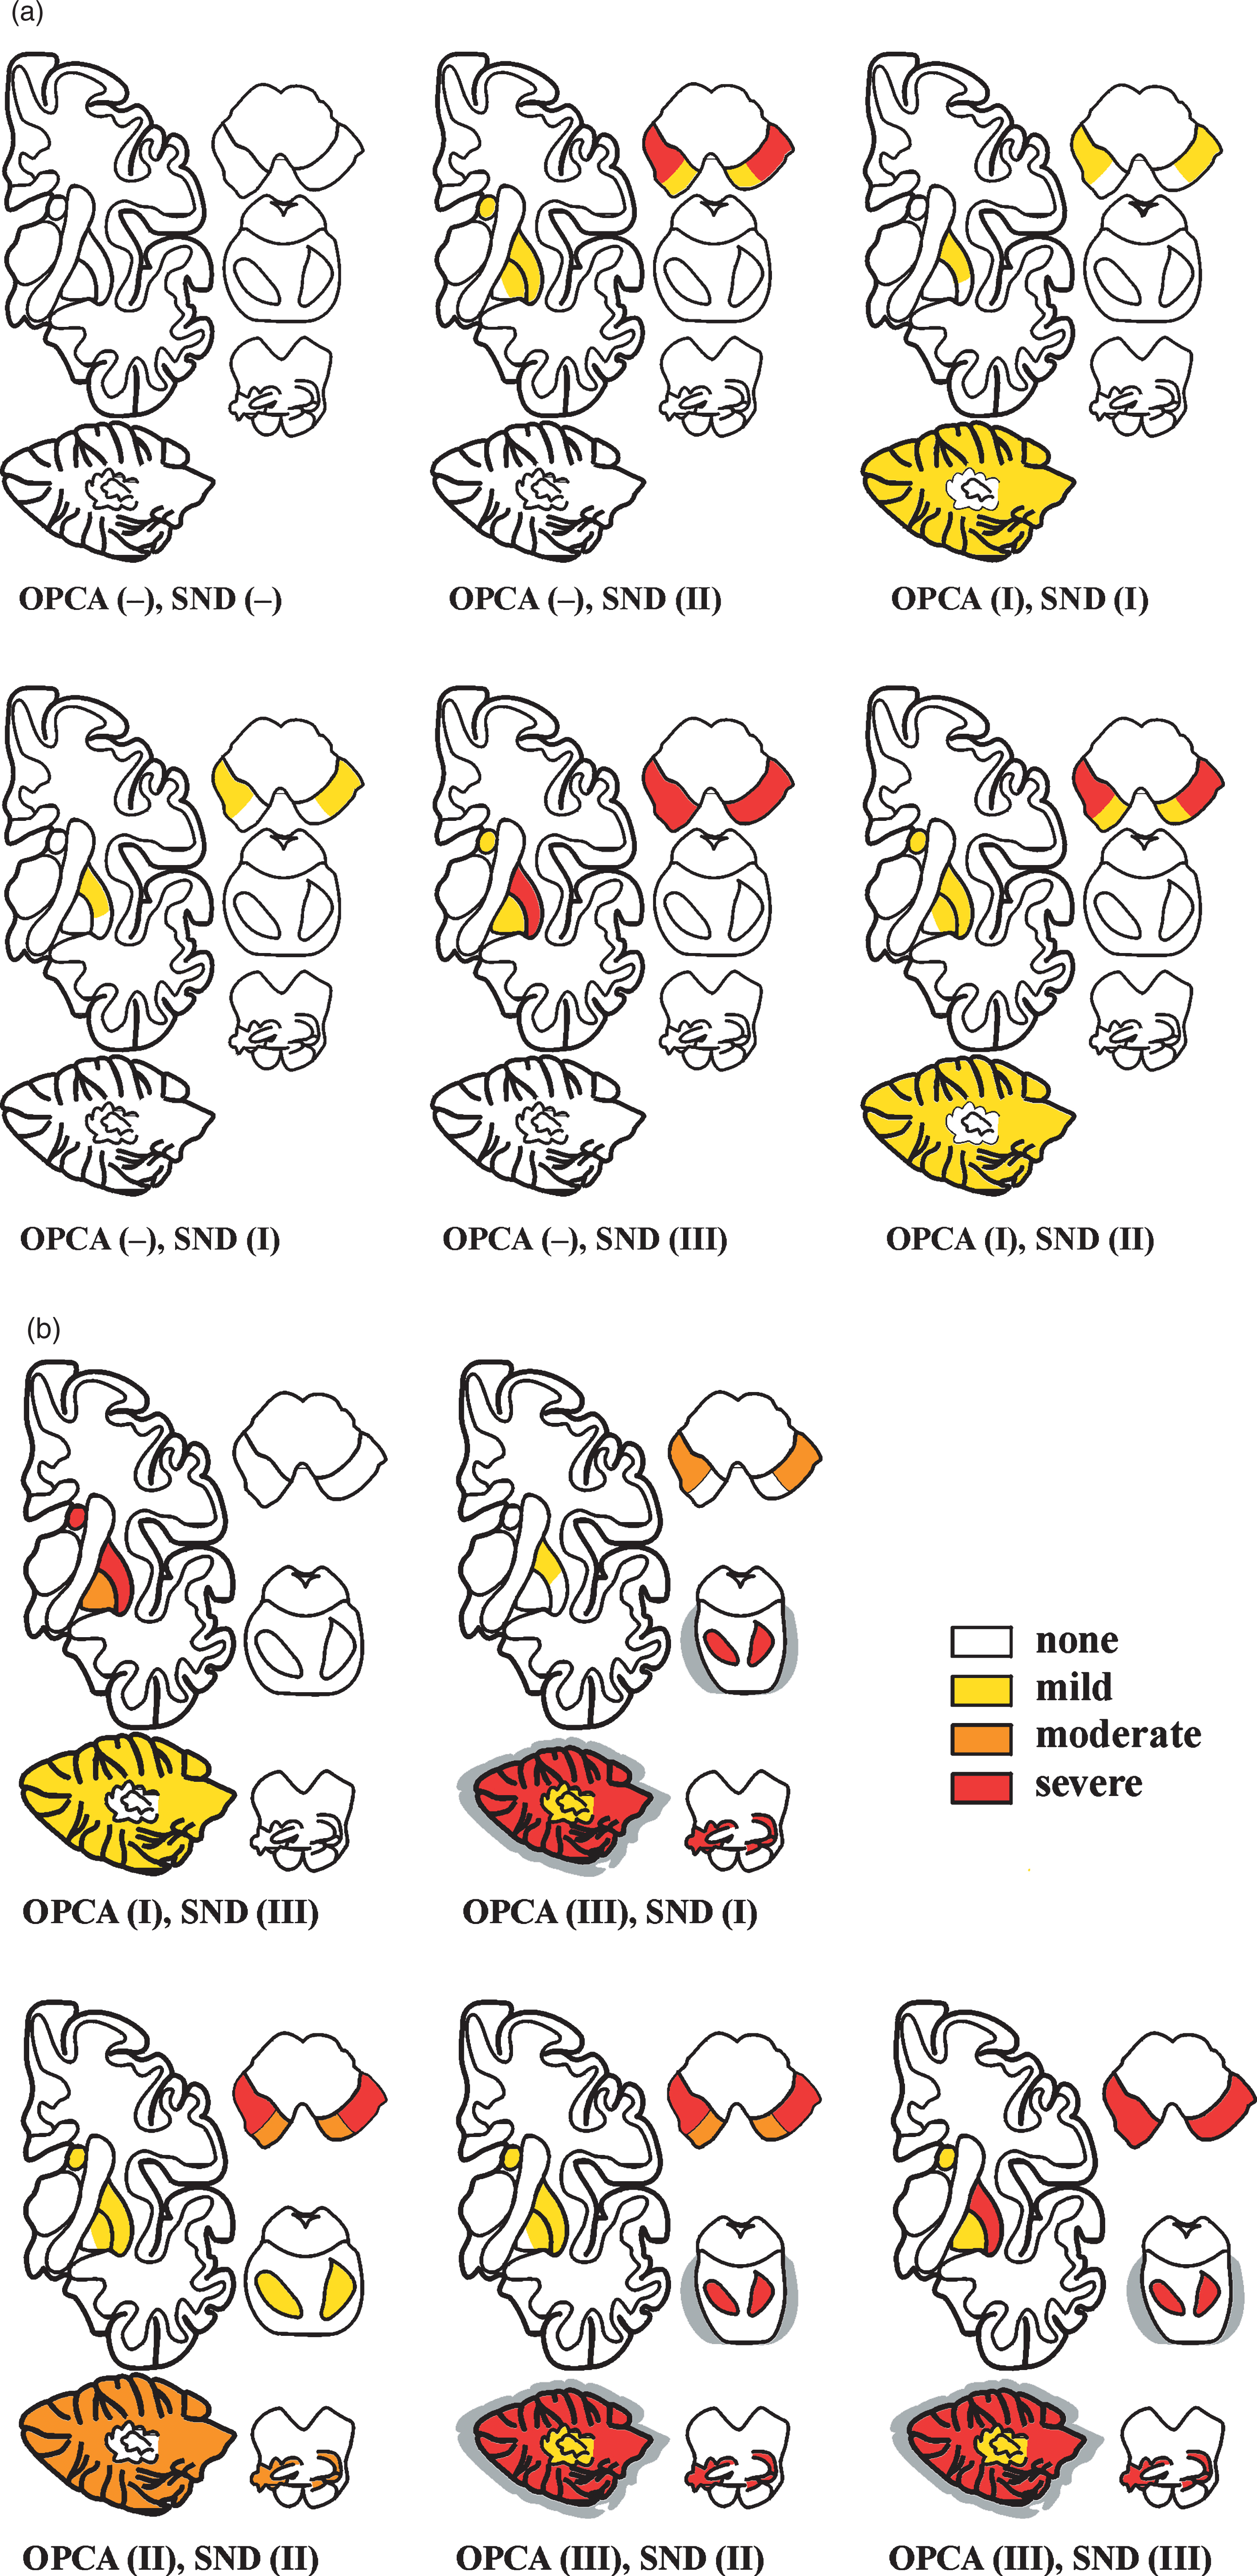 Schematic distribution of various combination types of SND and OPCA in 42 autopsy-proven cases of MSA (22 MS-P, 20 MS-C), showing different severity of morphological lesions (from [213]).